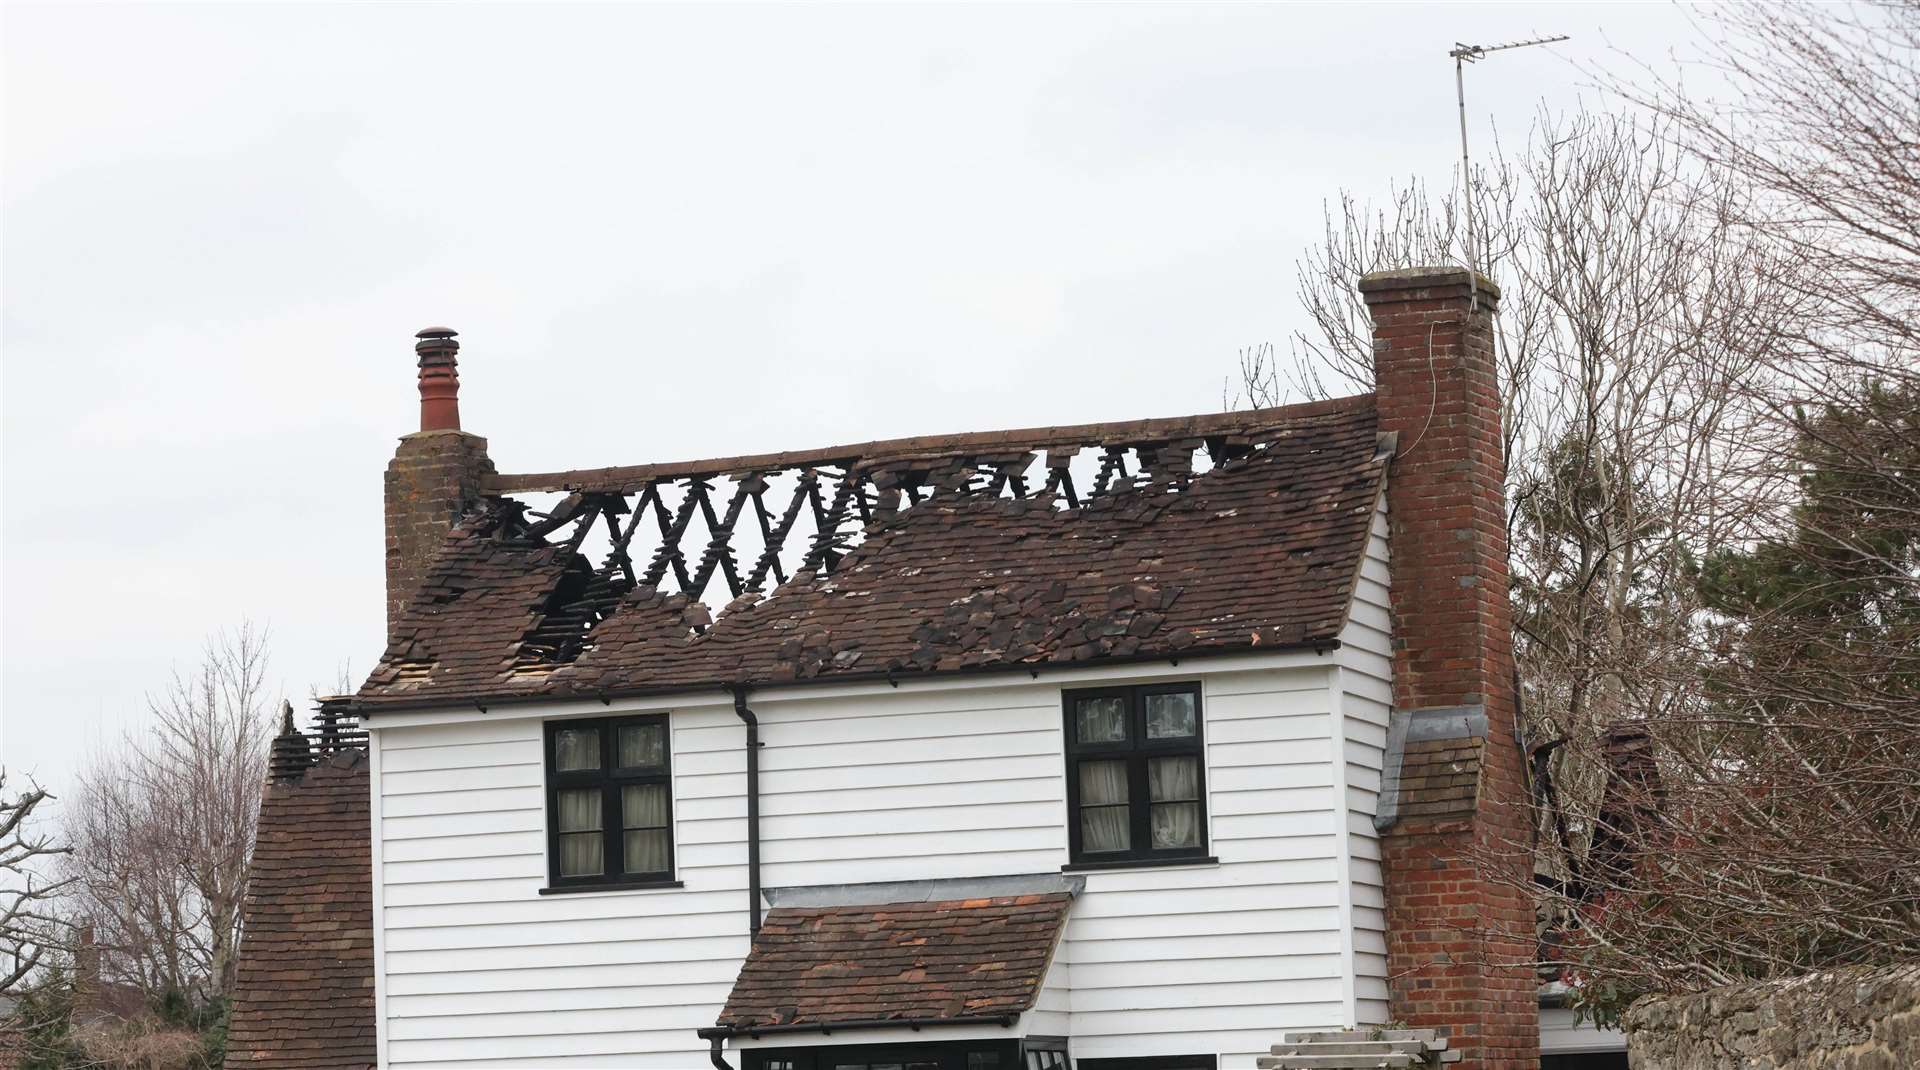 A nearby home was seriously damaged after the blaze. Picture: UKNIP